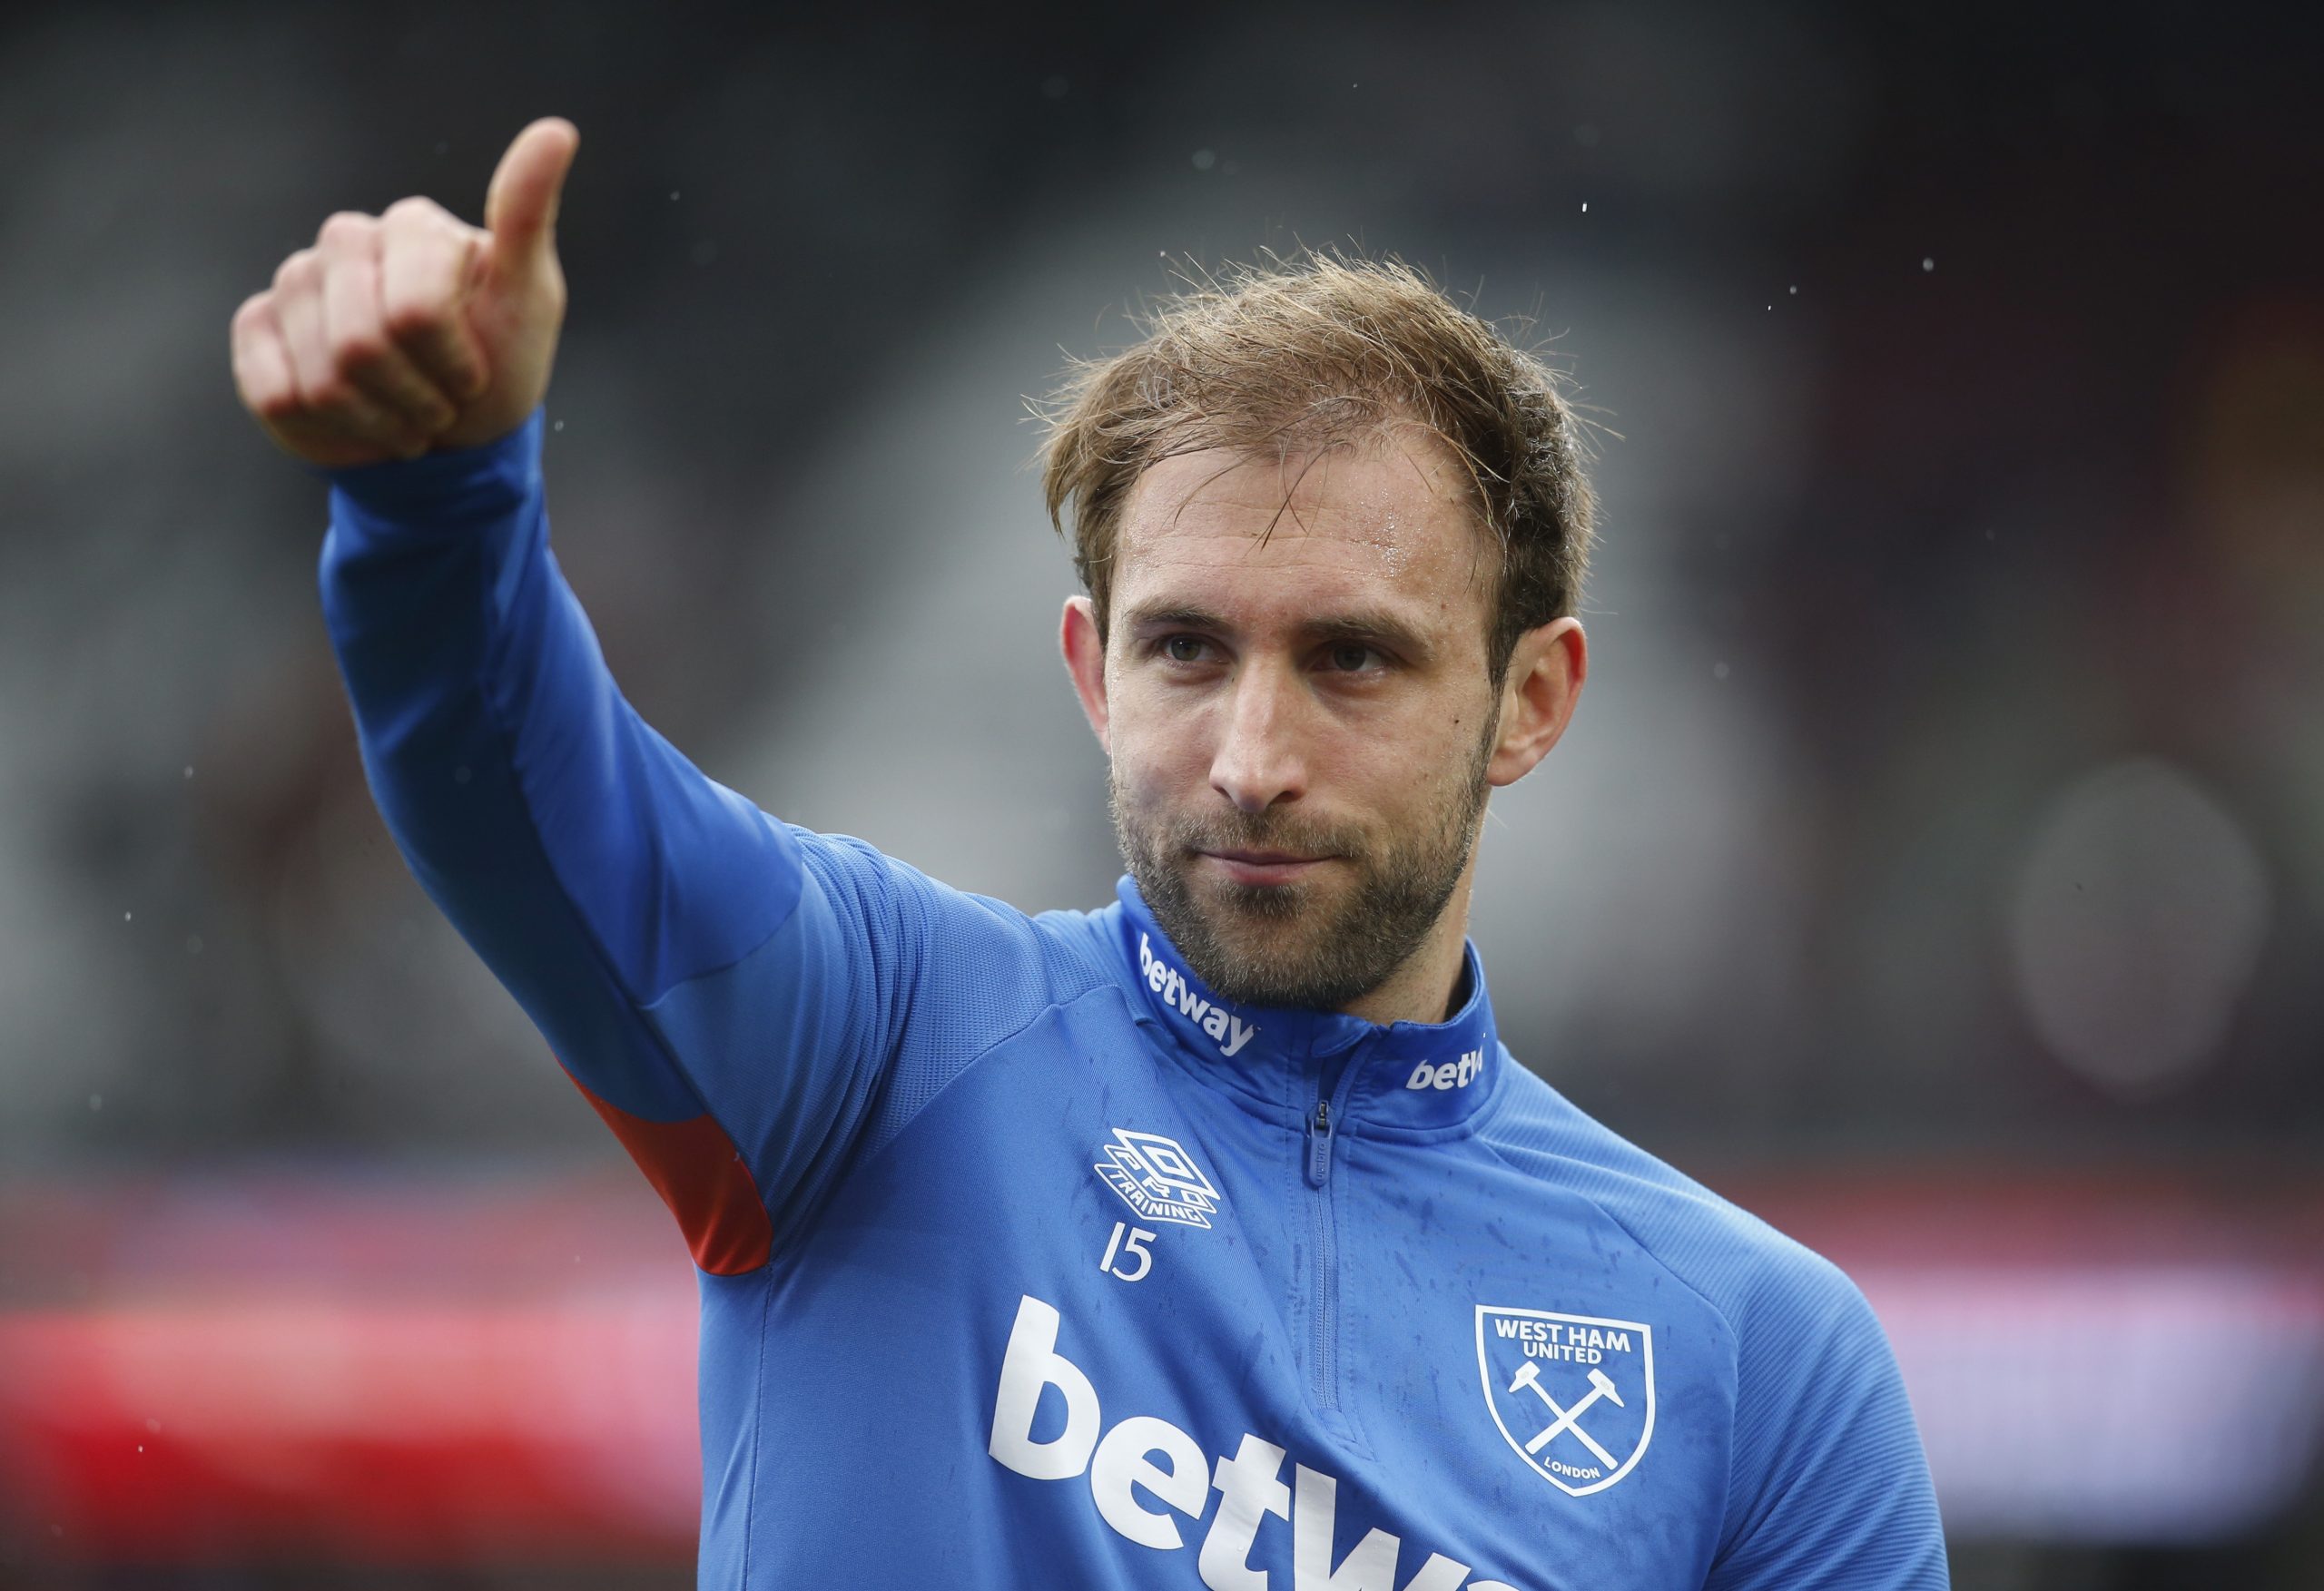 West Ham United's Craig Dawson during the warm up before the match Action Images via Reuters/Ed Sykes